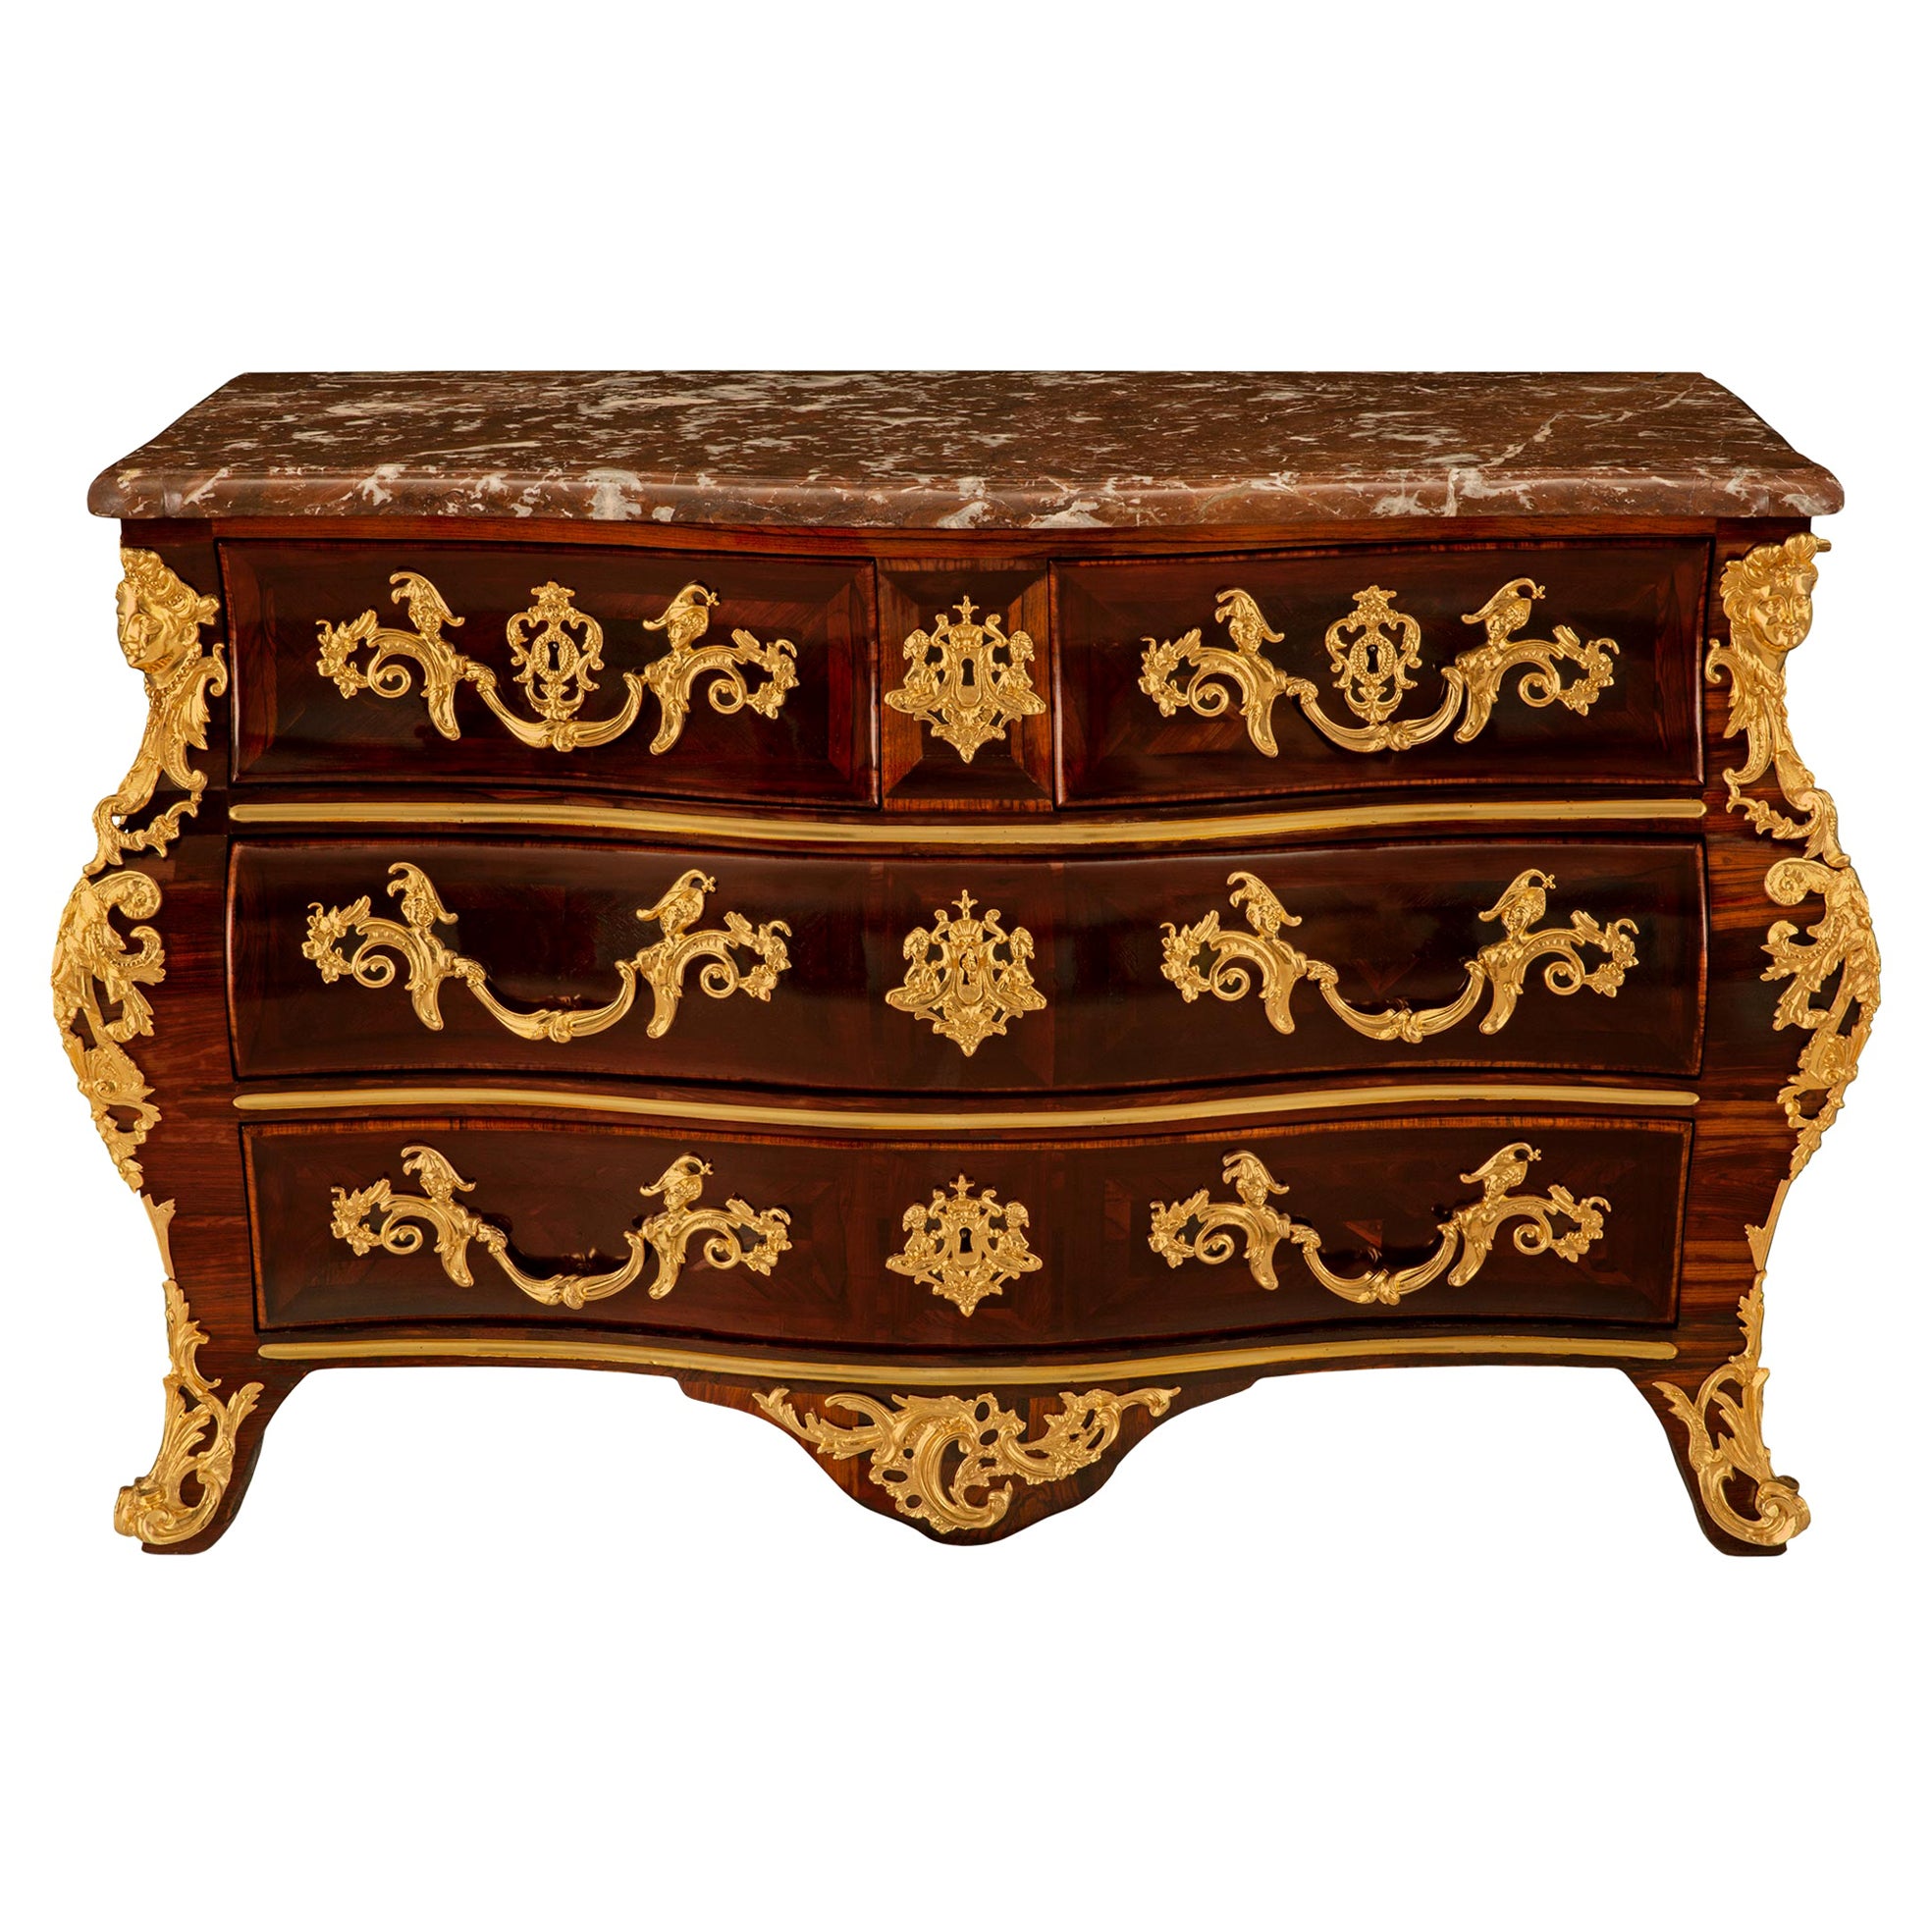 French Mid-18th Century Régence Period Rosewood, Ormolu and Marble Commode For Sale